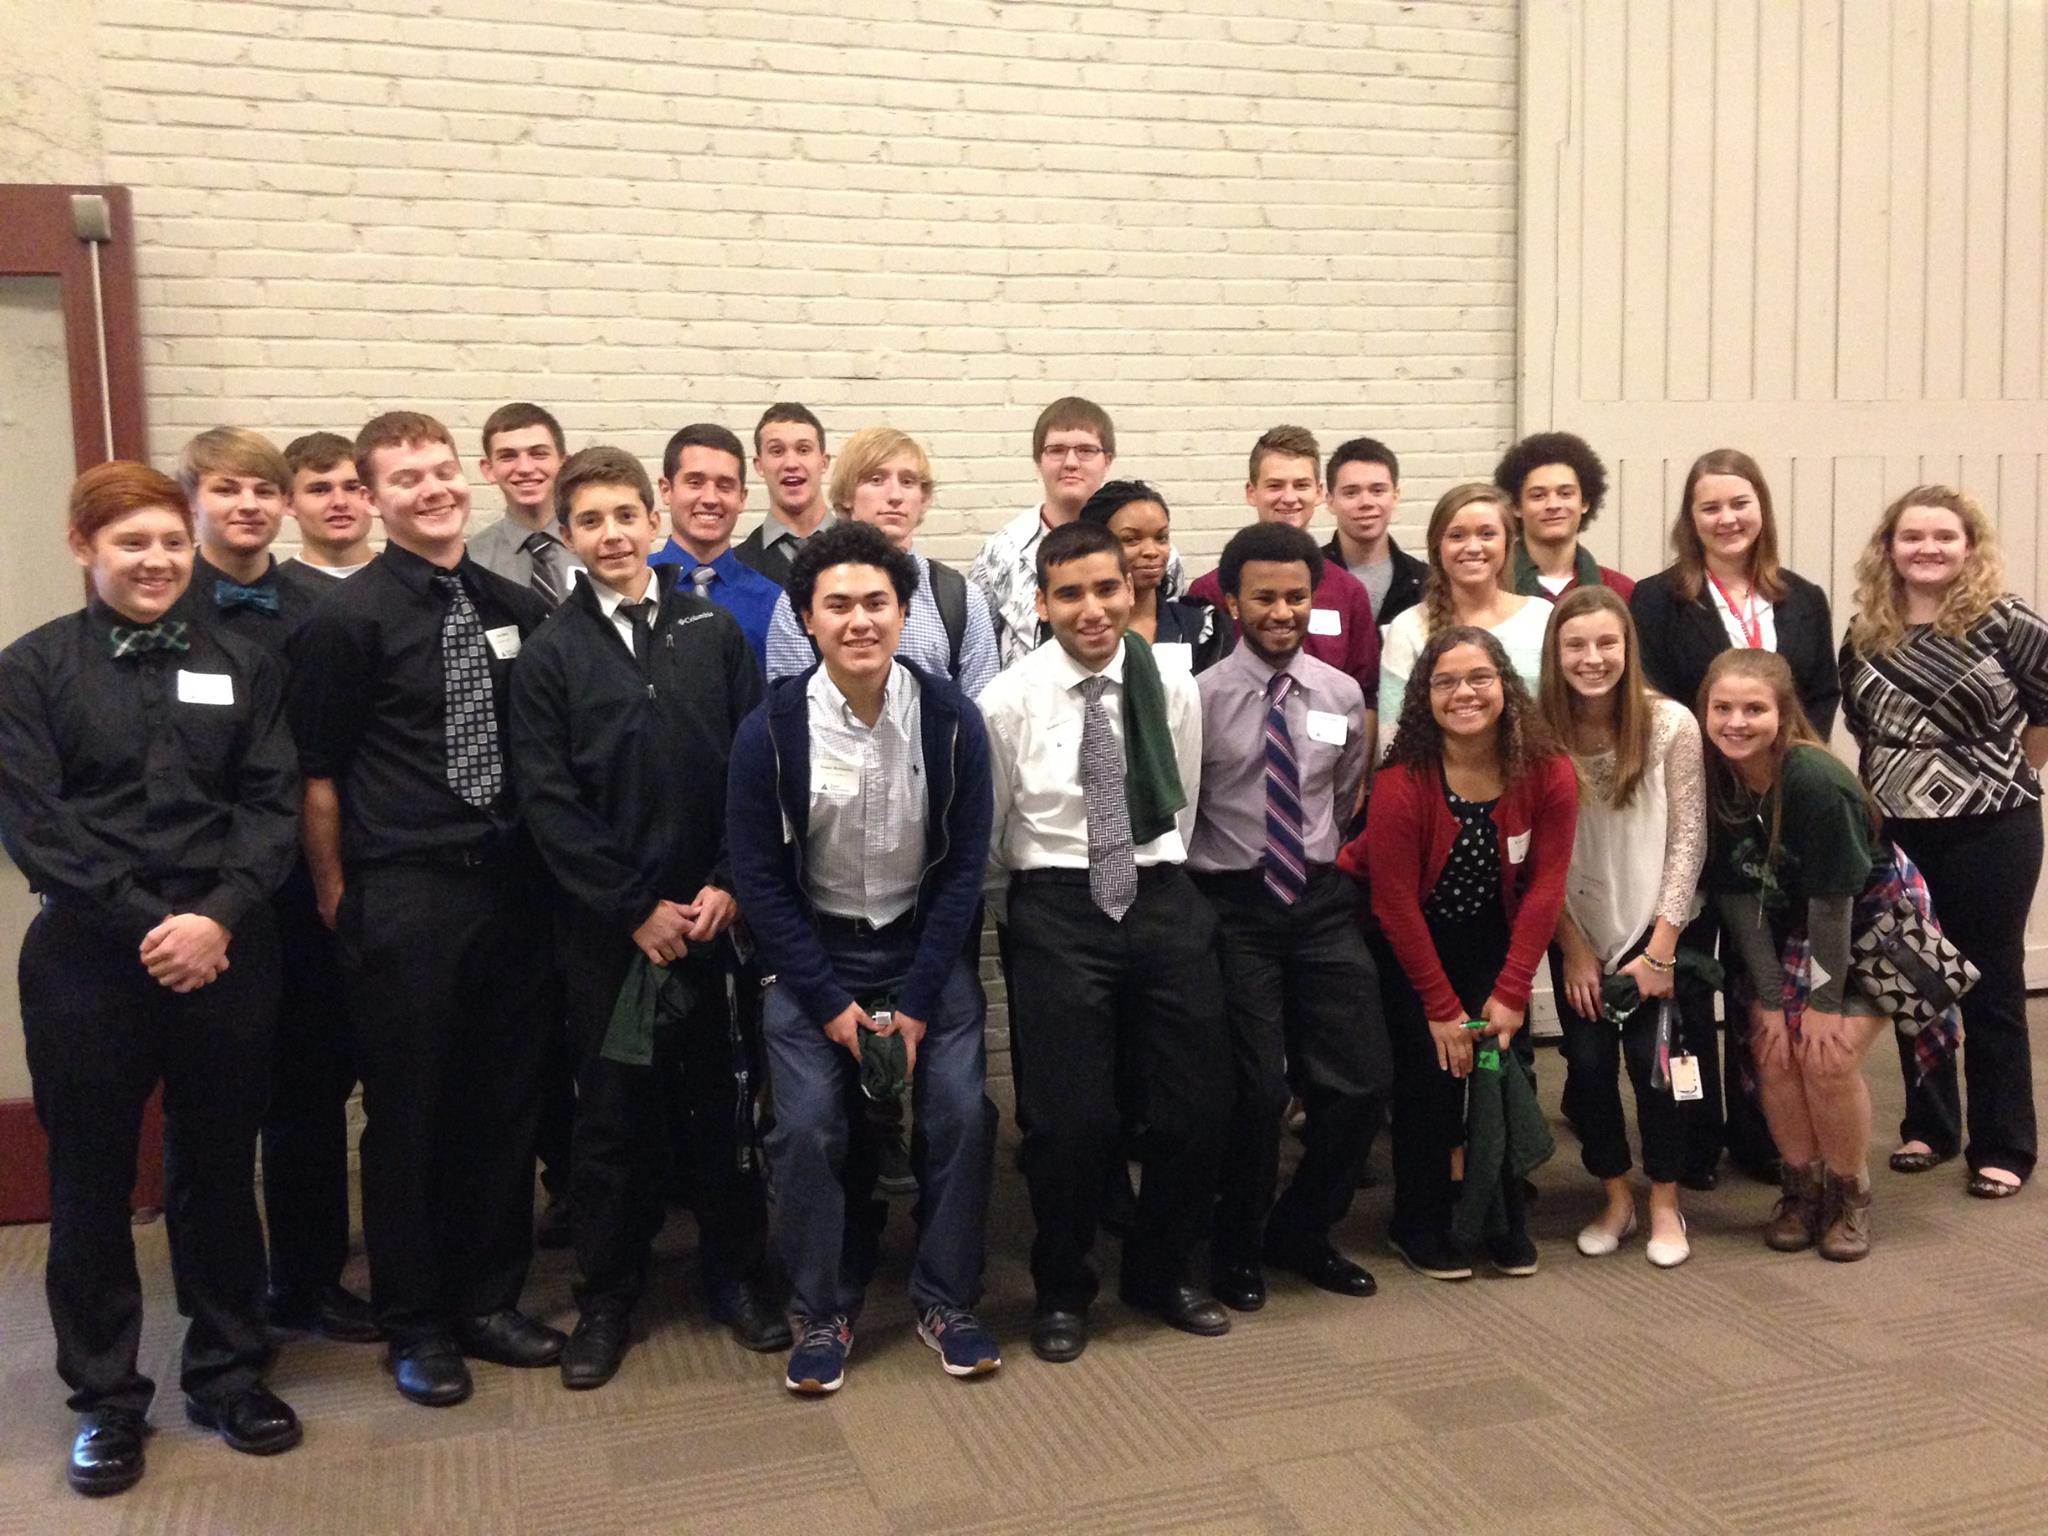 North Star students attend the Stock Market Challenge event on Tuesday, Nov. 17.
Courtesy Photo